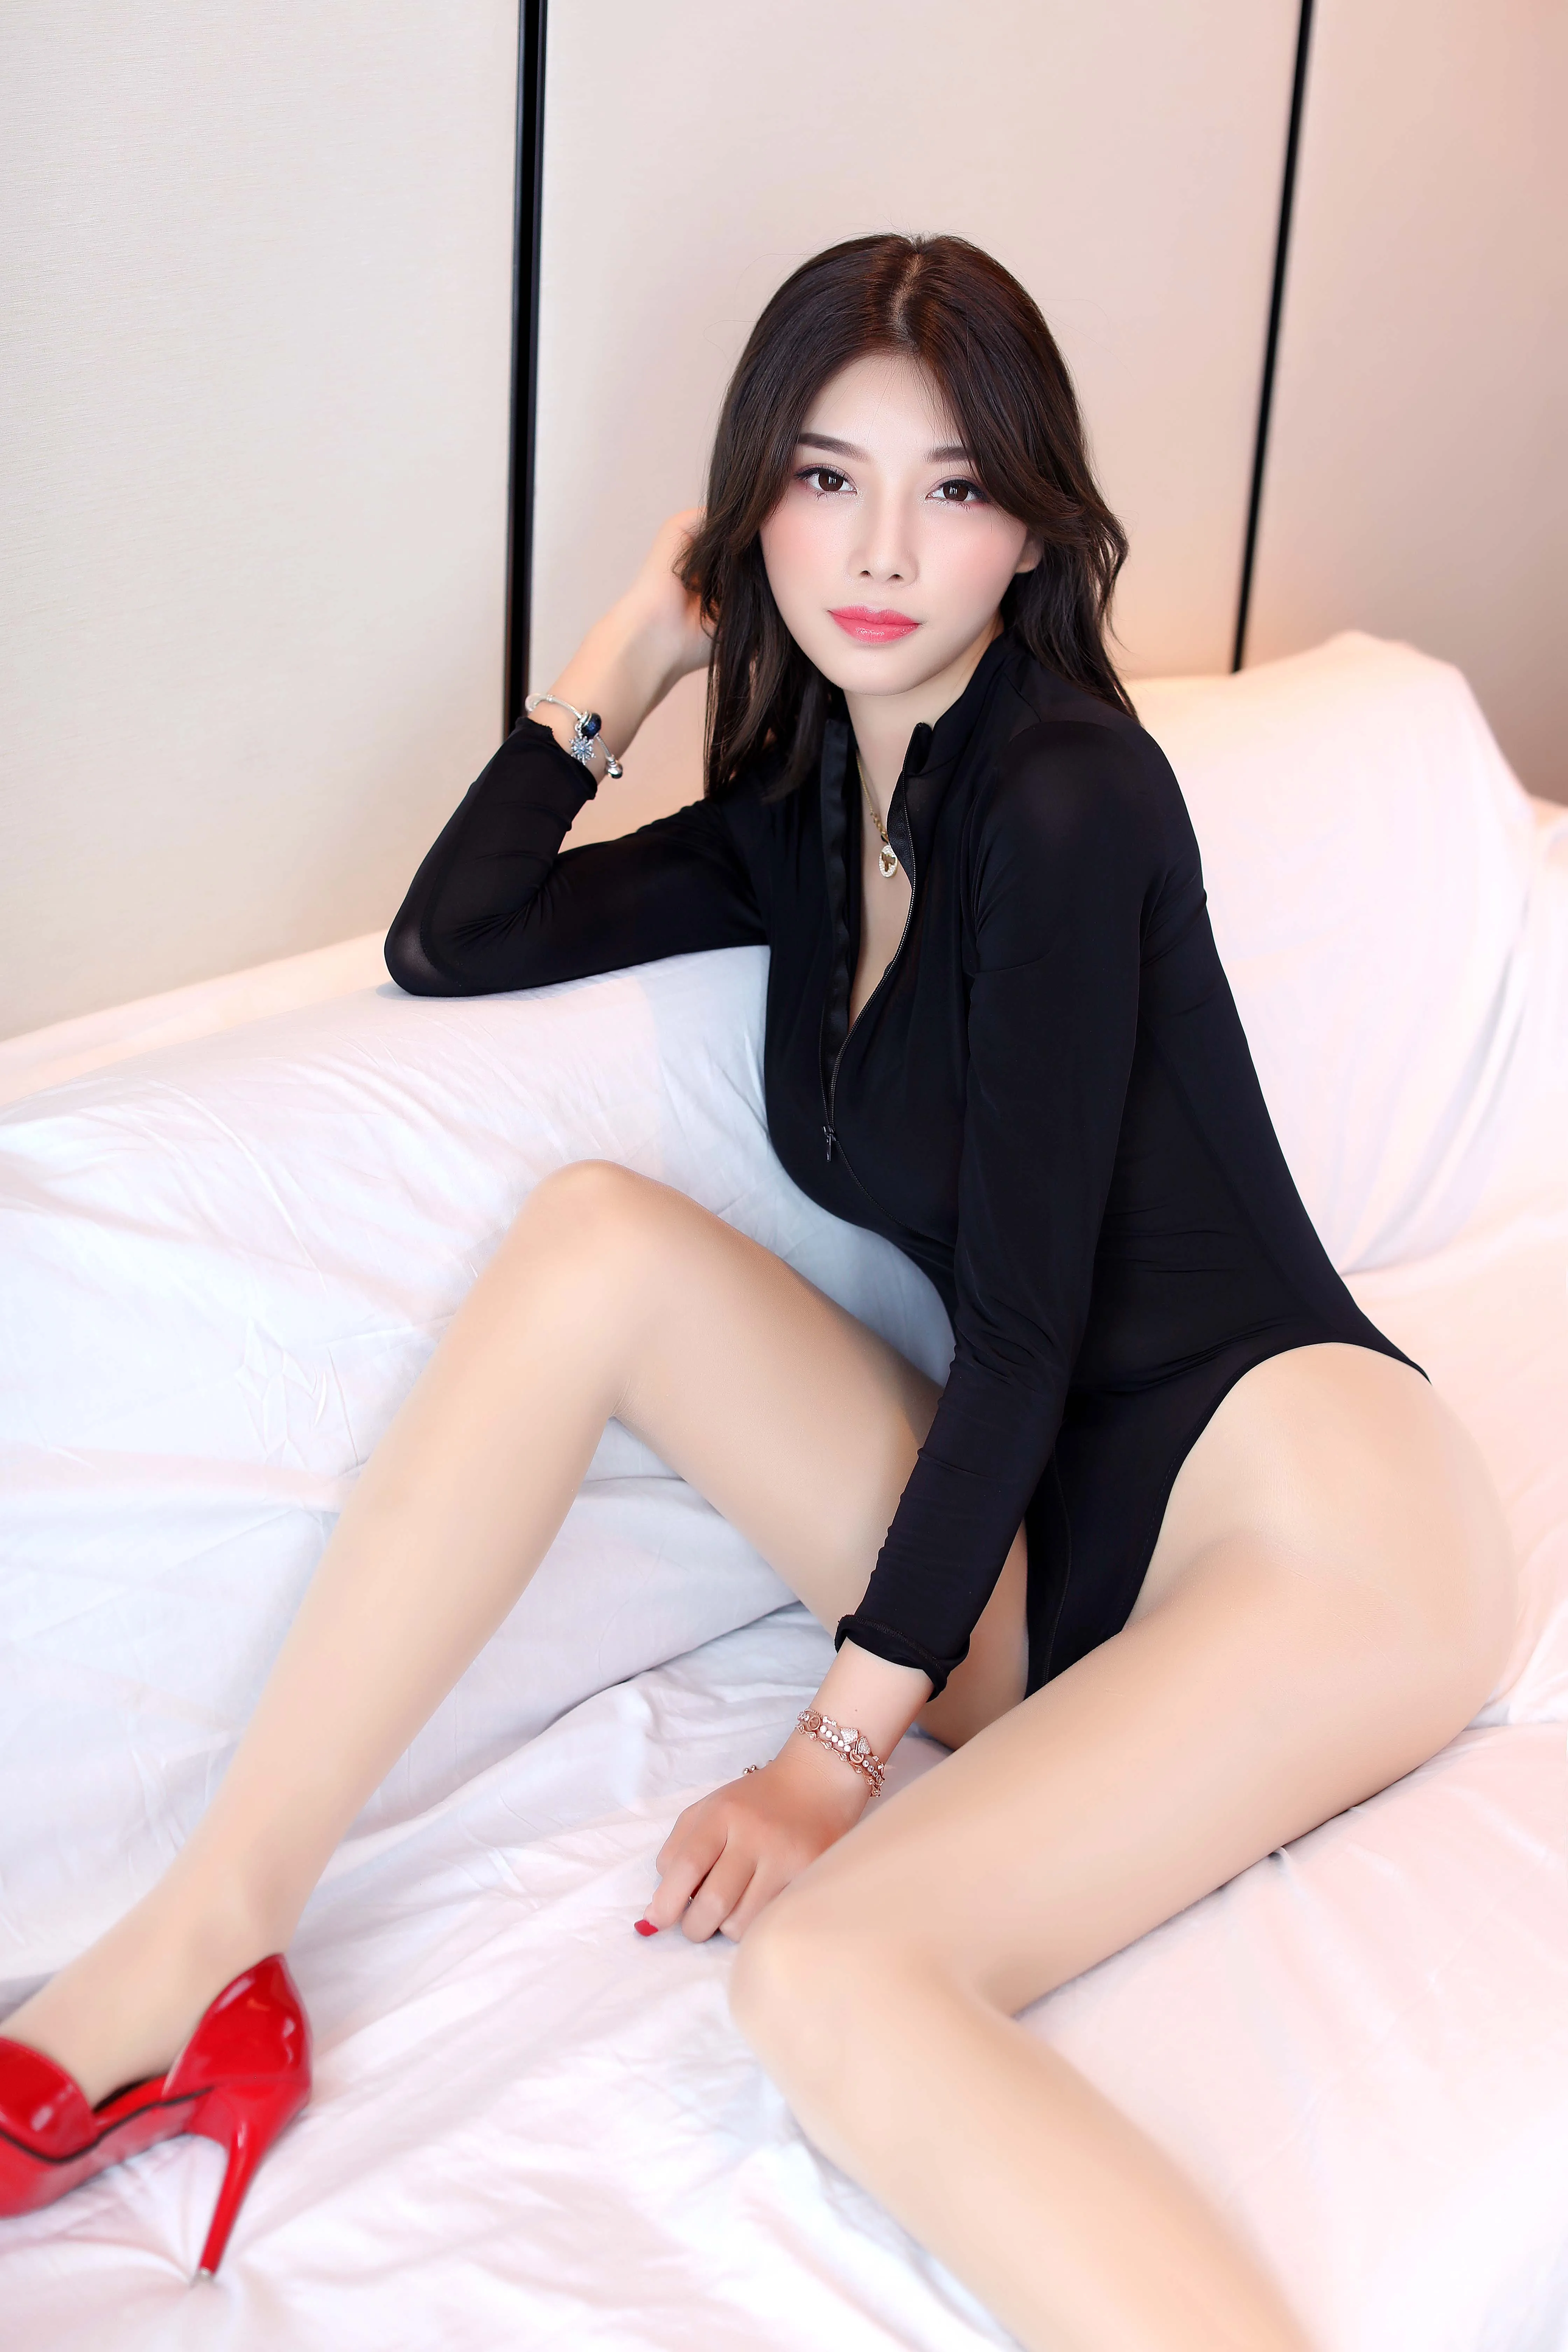 mesh bodysuit Sexy Skinny High Cut Two Zipper Bodysuits Women See through Tops Long Sleeve Rompers Allure Jumpsuit Casual Slim Party Playsuit white long sleeve bodysuit